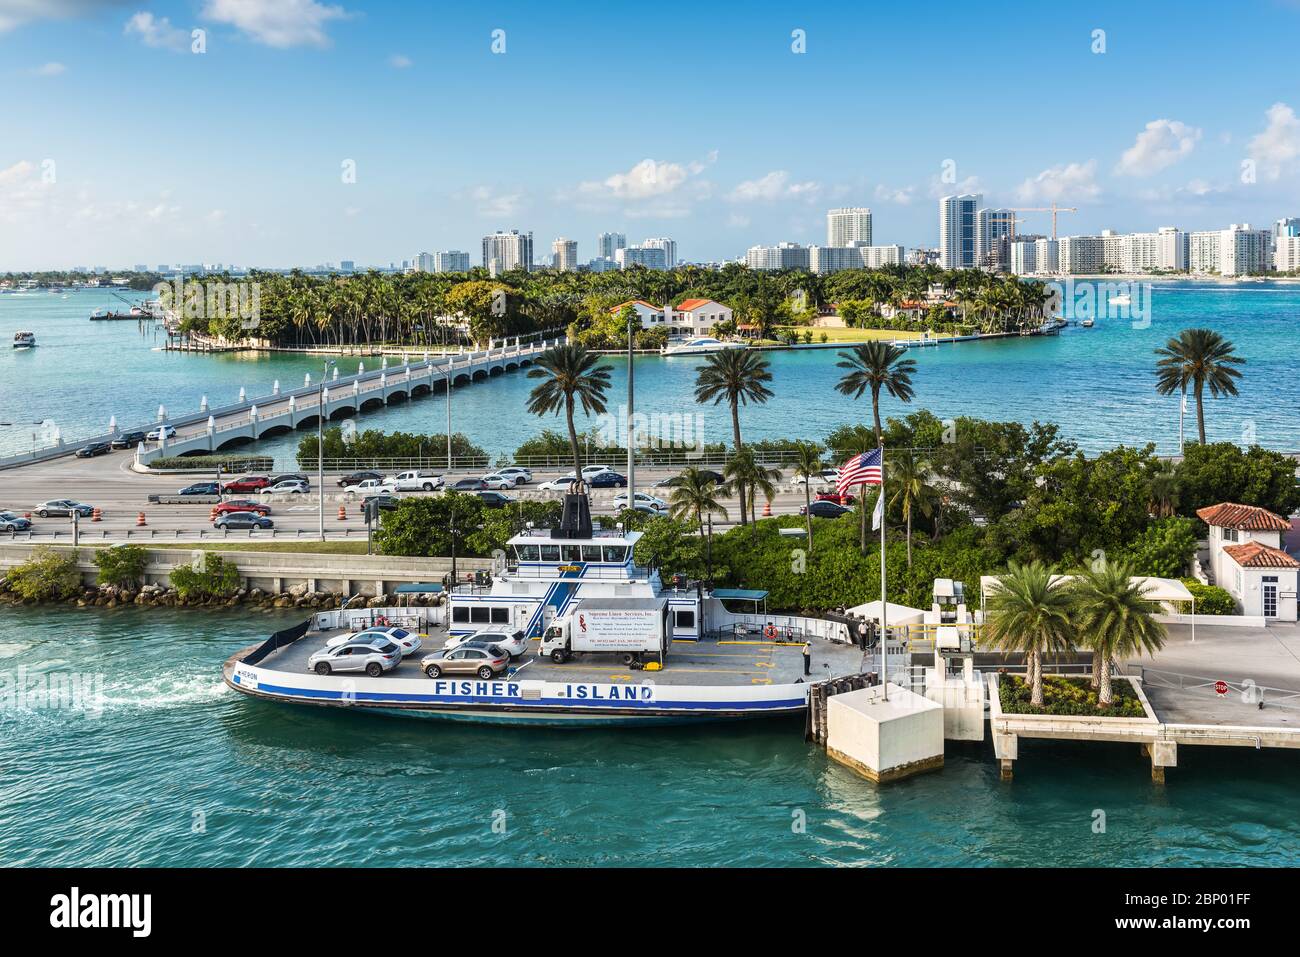 Miami, FL, United States - April 28, 2019: View of Star Island and the Fisher Island Ferry at Biscayne Bay in Miami, Florida, United States of America Stock Photo